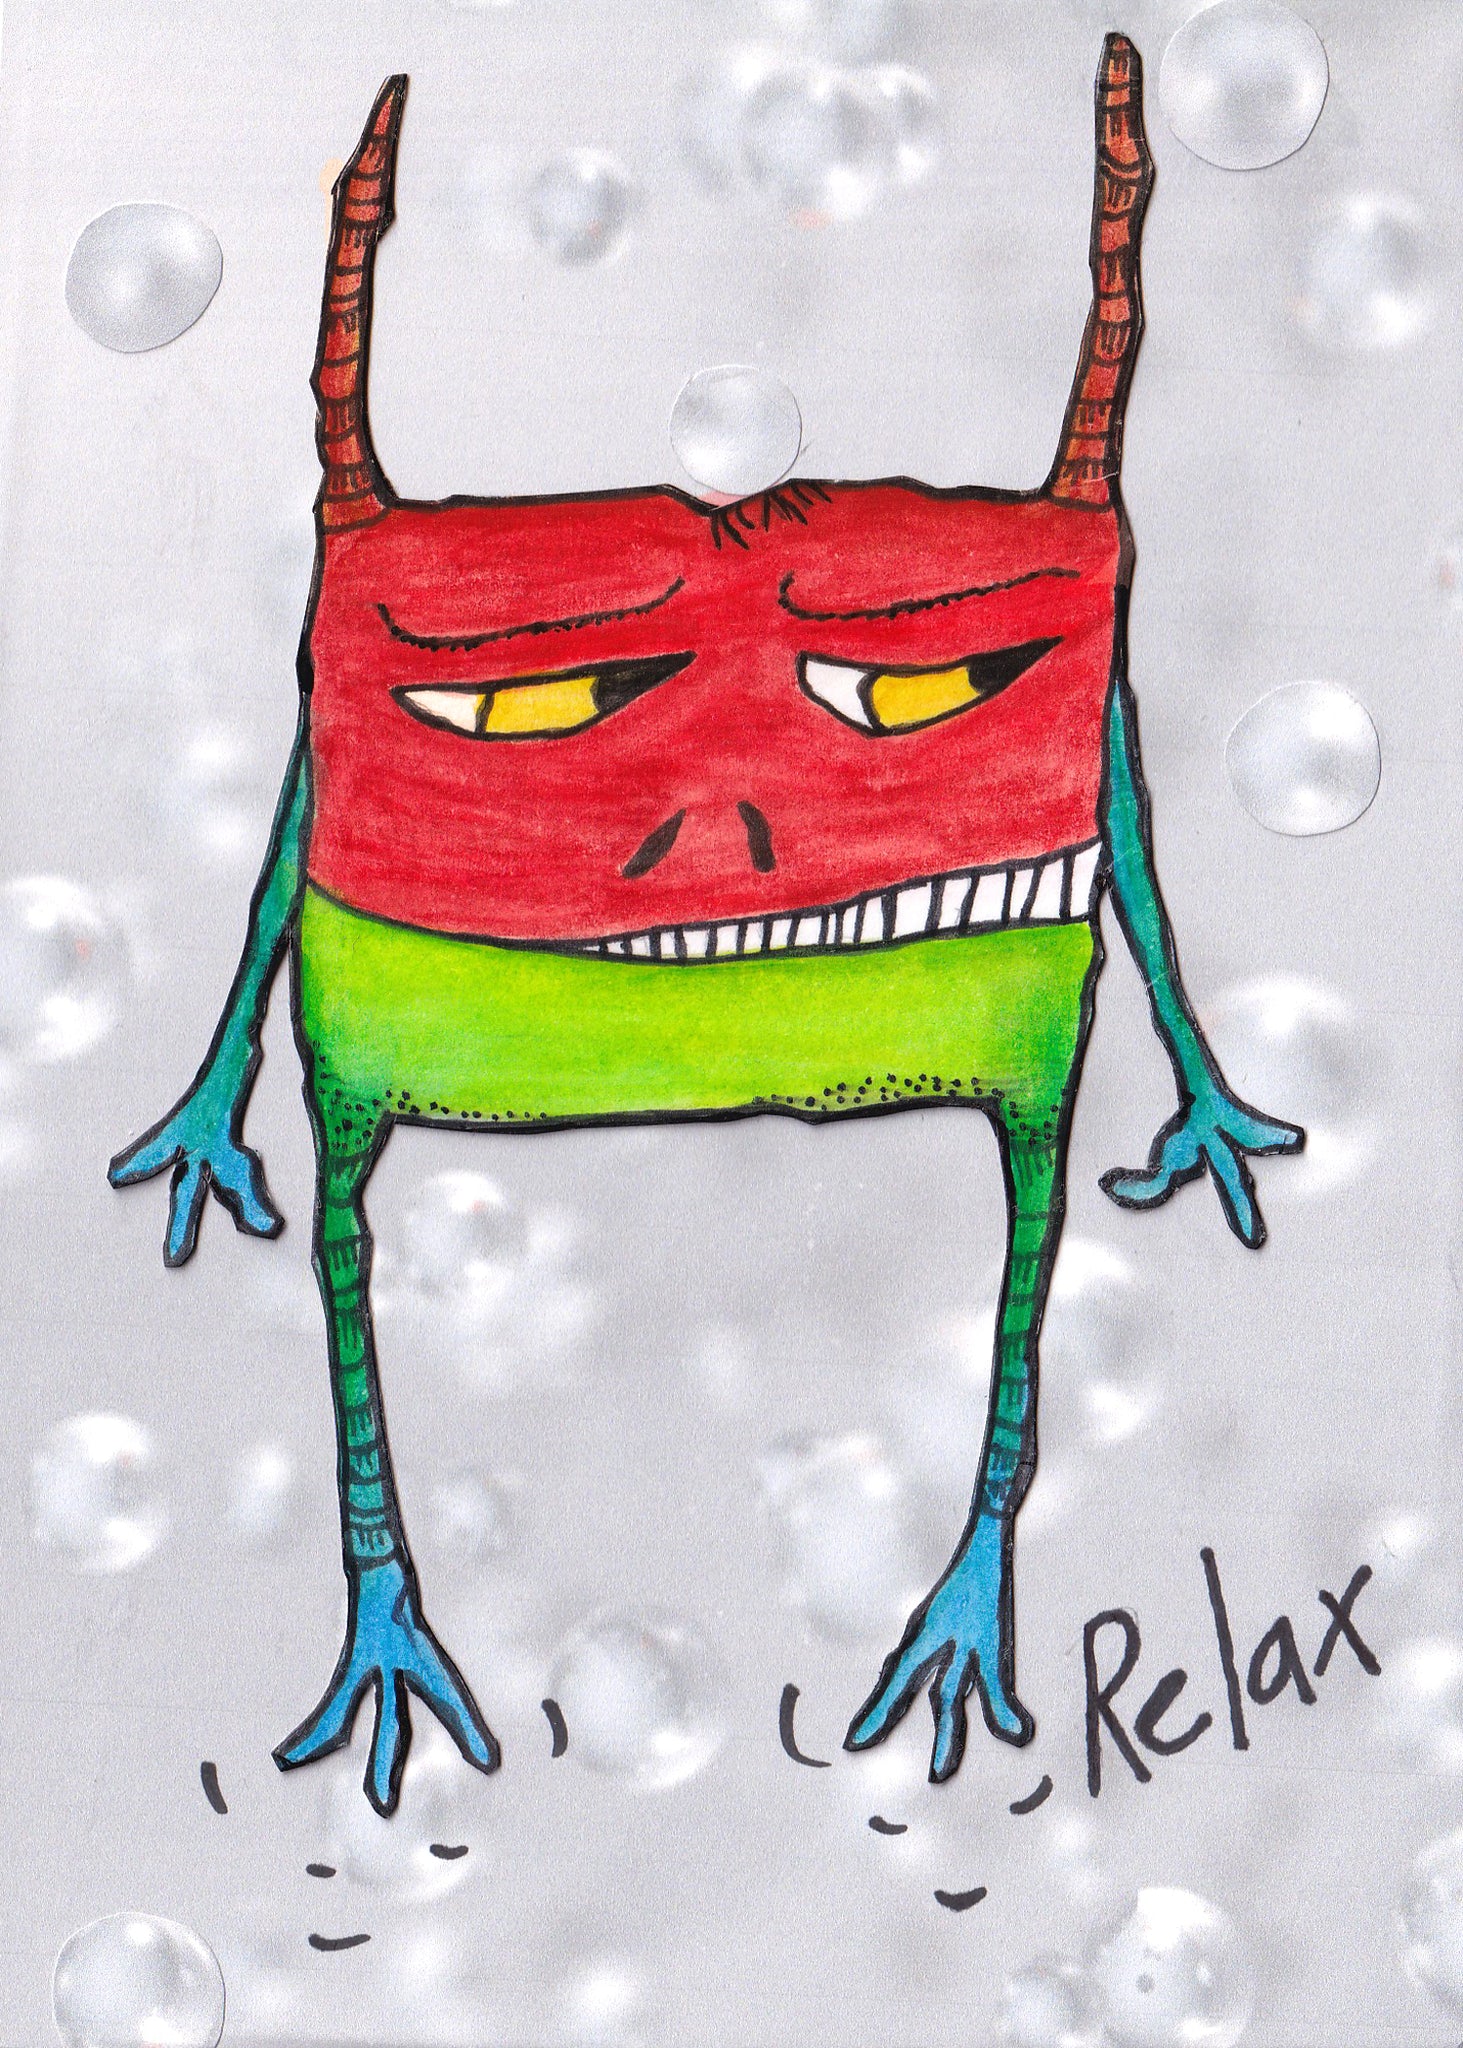 Nim Monster Art Picture Red Bright Green Yellow and Grey